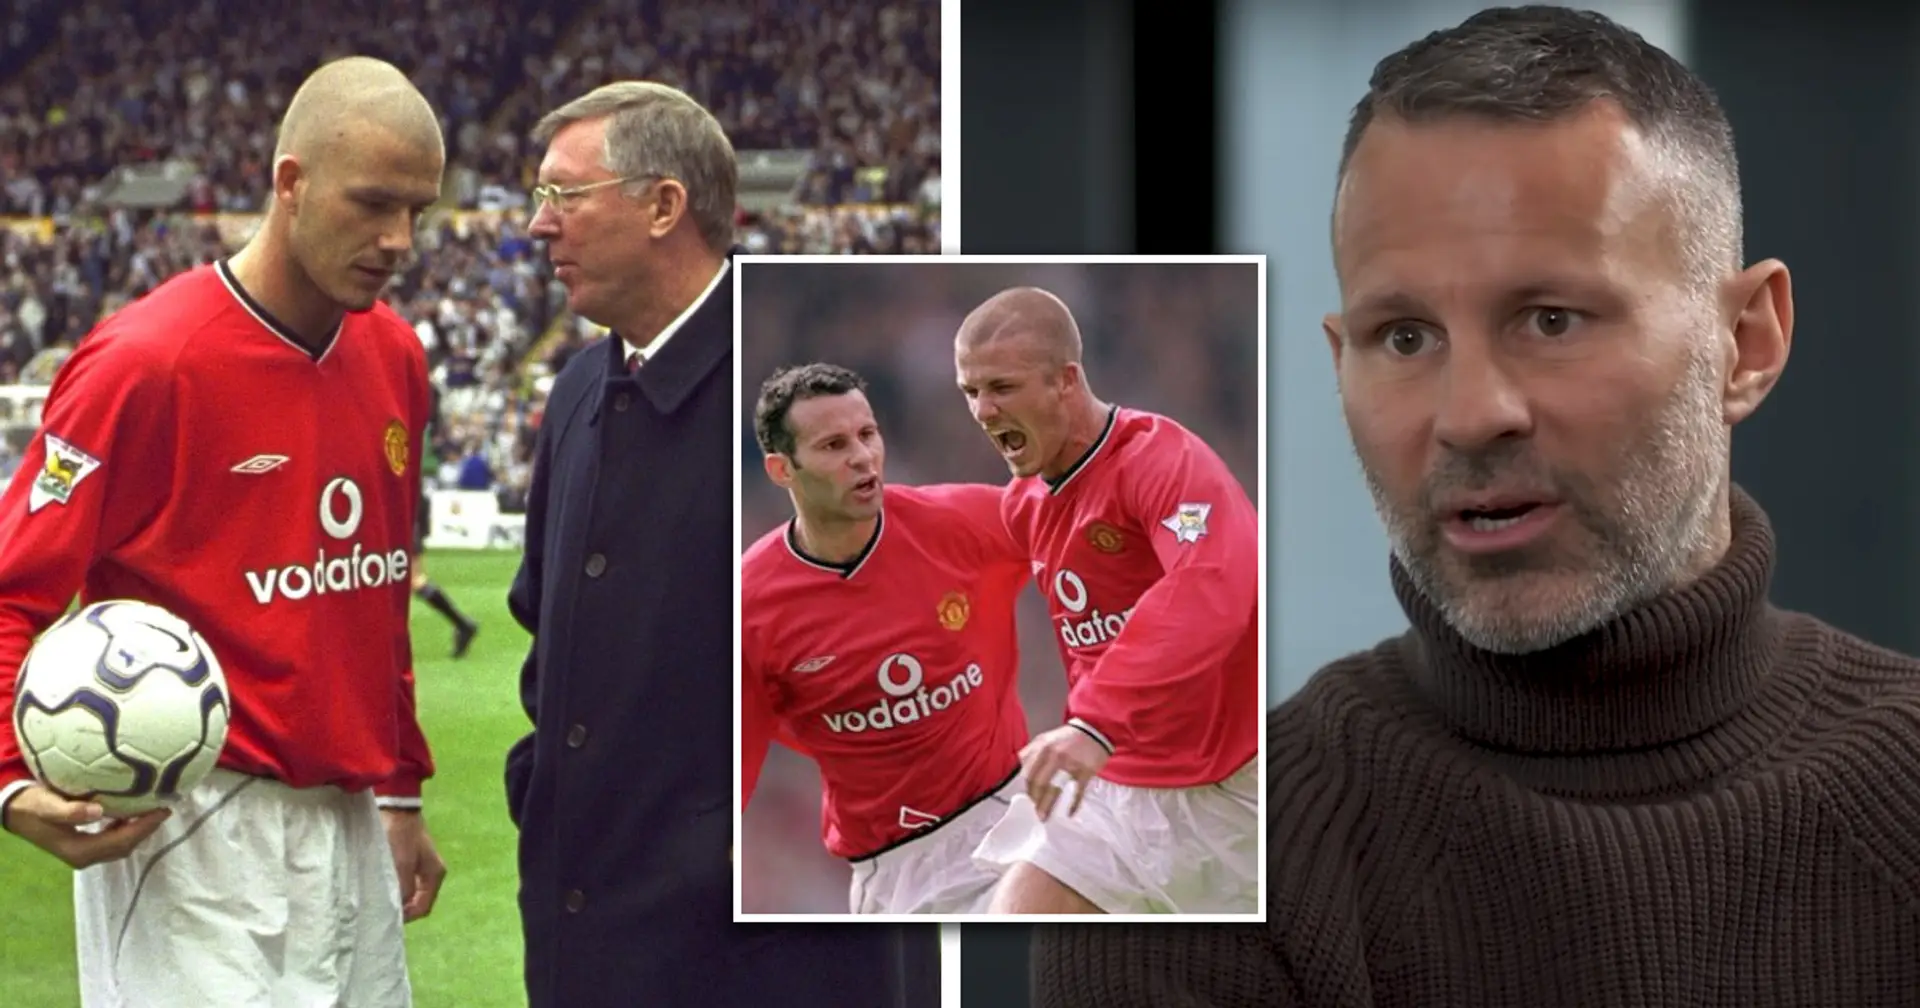 Ryan Giggs recalls David Beckham's departure from Manchester United after a series of clashes with Ferguson 